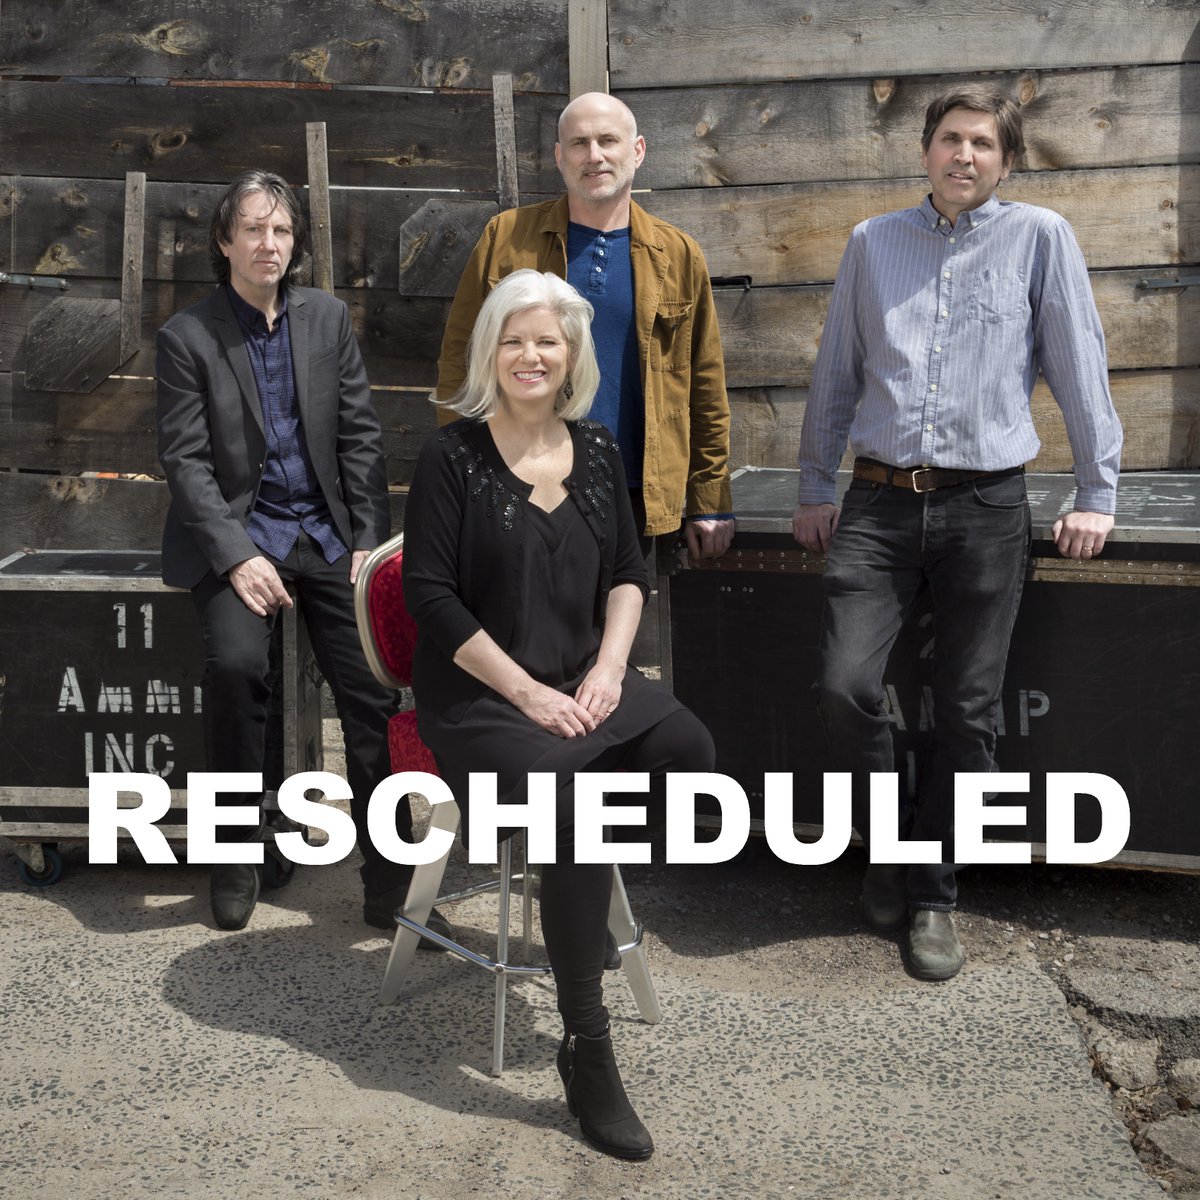 The Cowboy Junkies show scheduled for February 3rd has been rescheduled to April 13th. All tickets will be honored for the new date. If you have any questions or cannot make the new date, please contact the Academy box office at boxoffice@aomtheatre.com or 413.584.9032 x105.